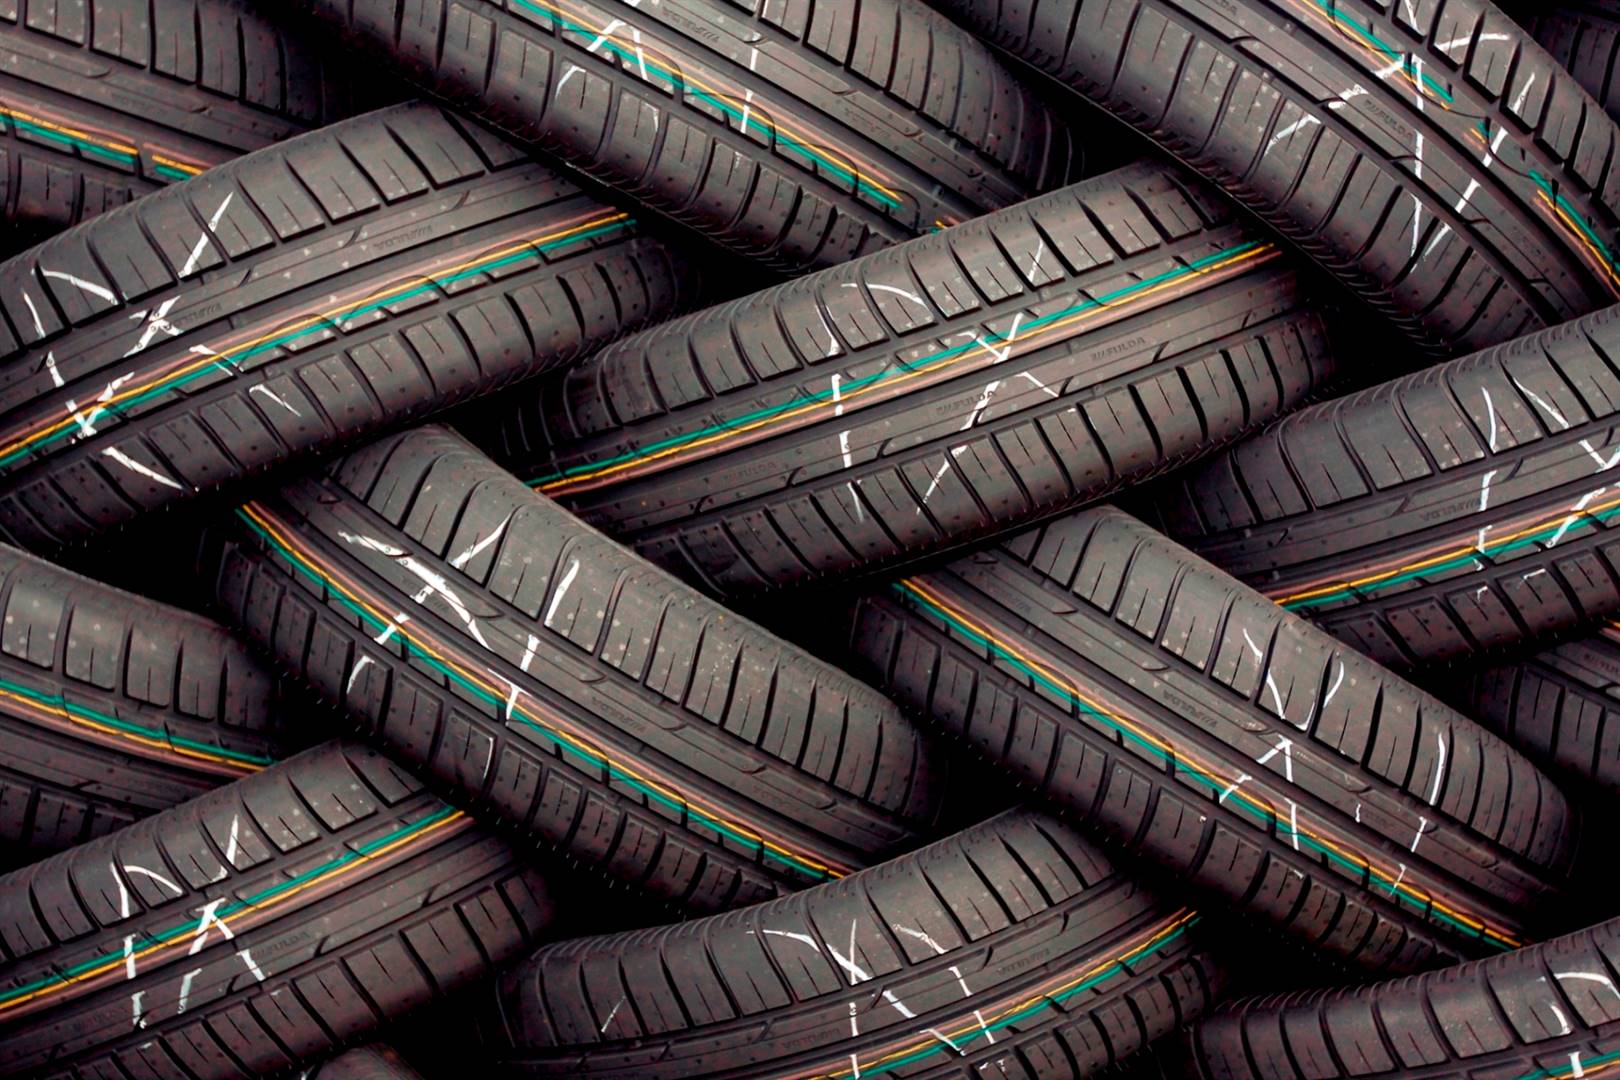 Bridgestone said it is considering closing 11 of its retail stores in South Africa due to the challenging business environment.